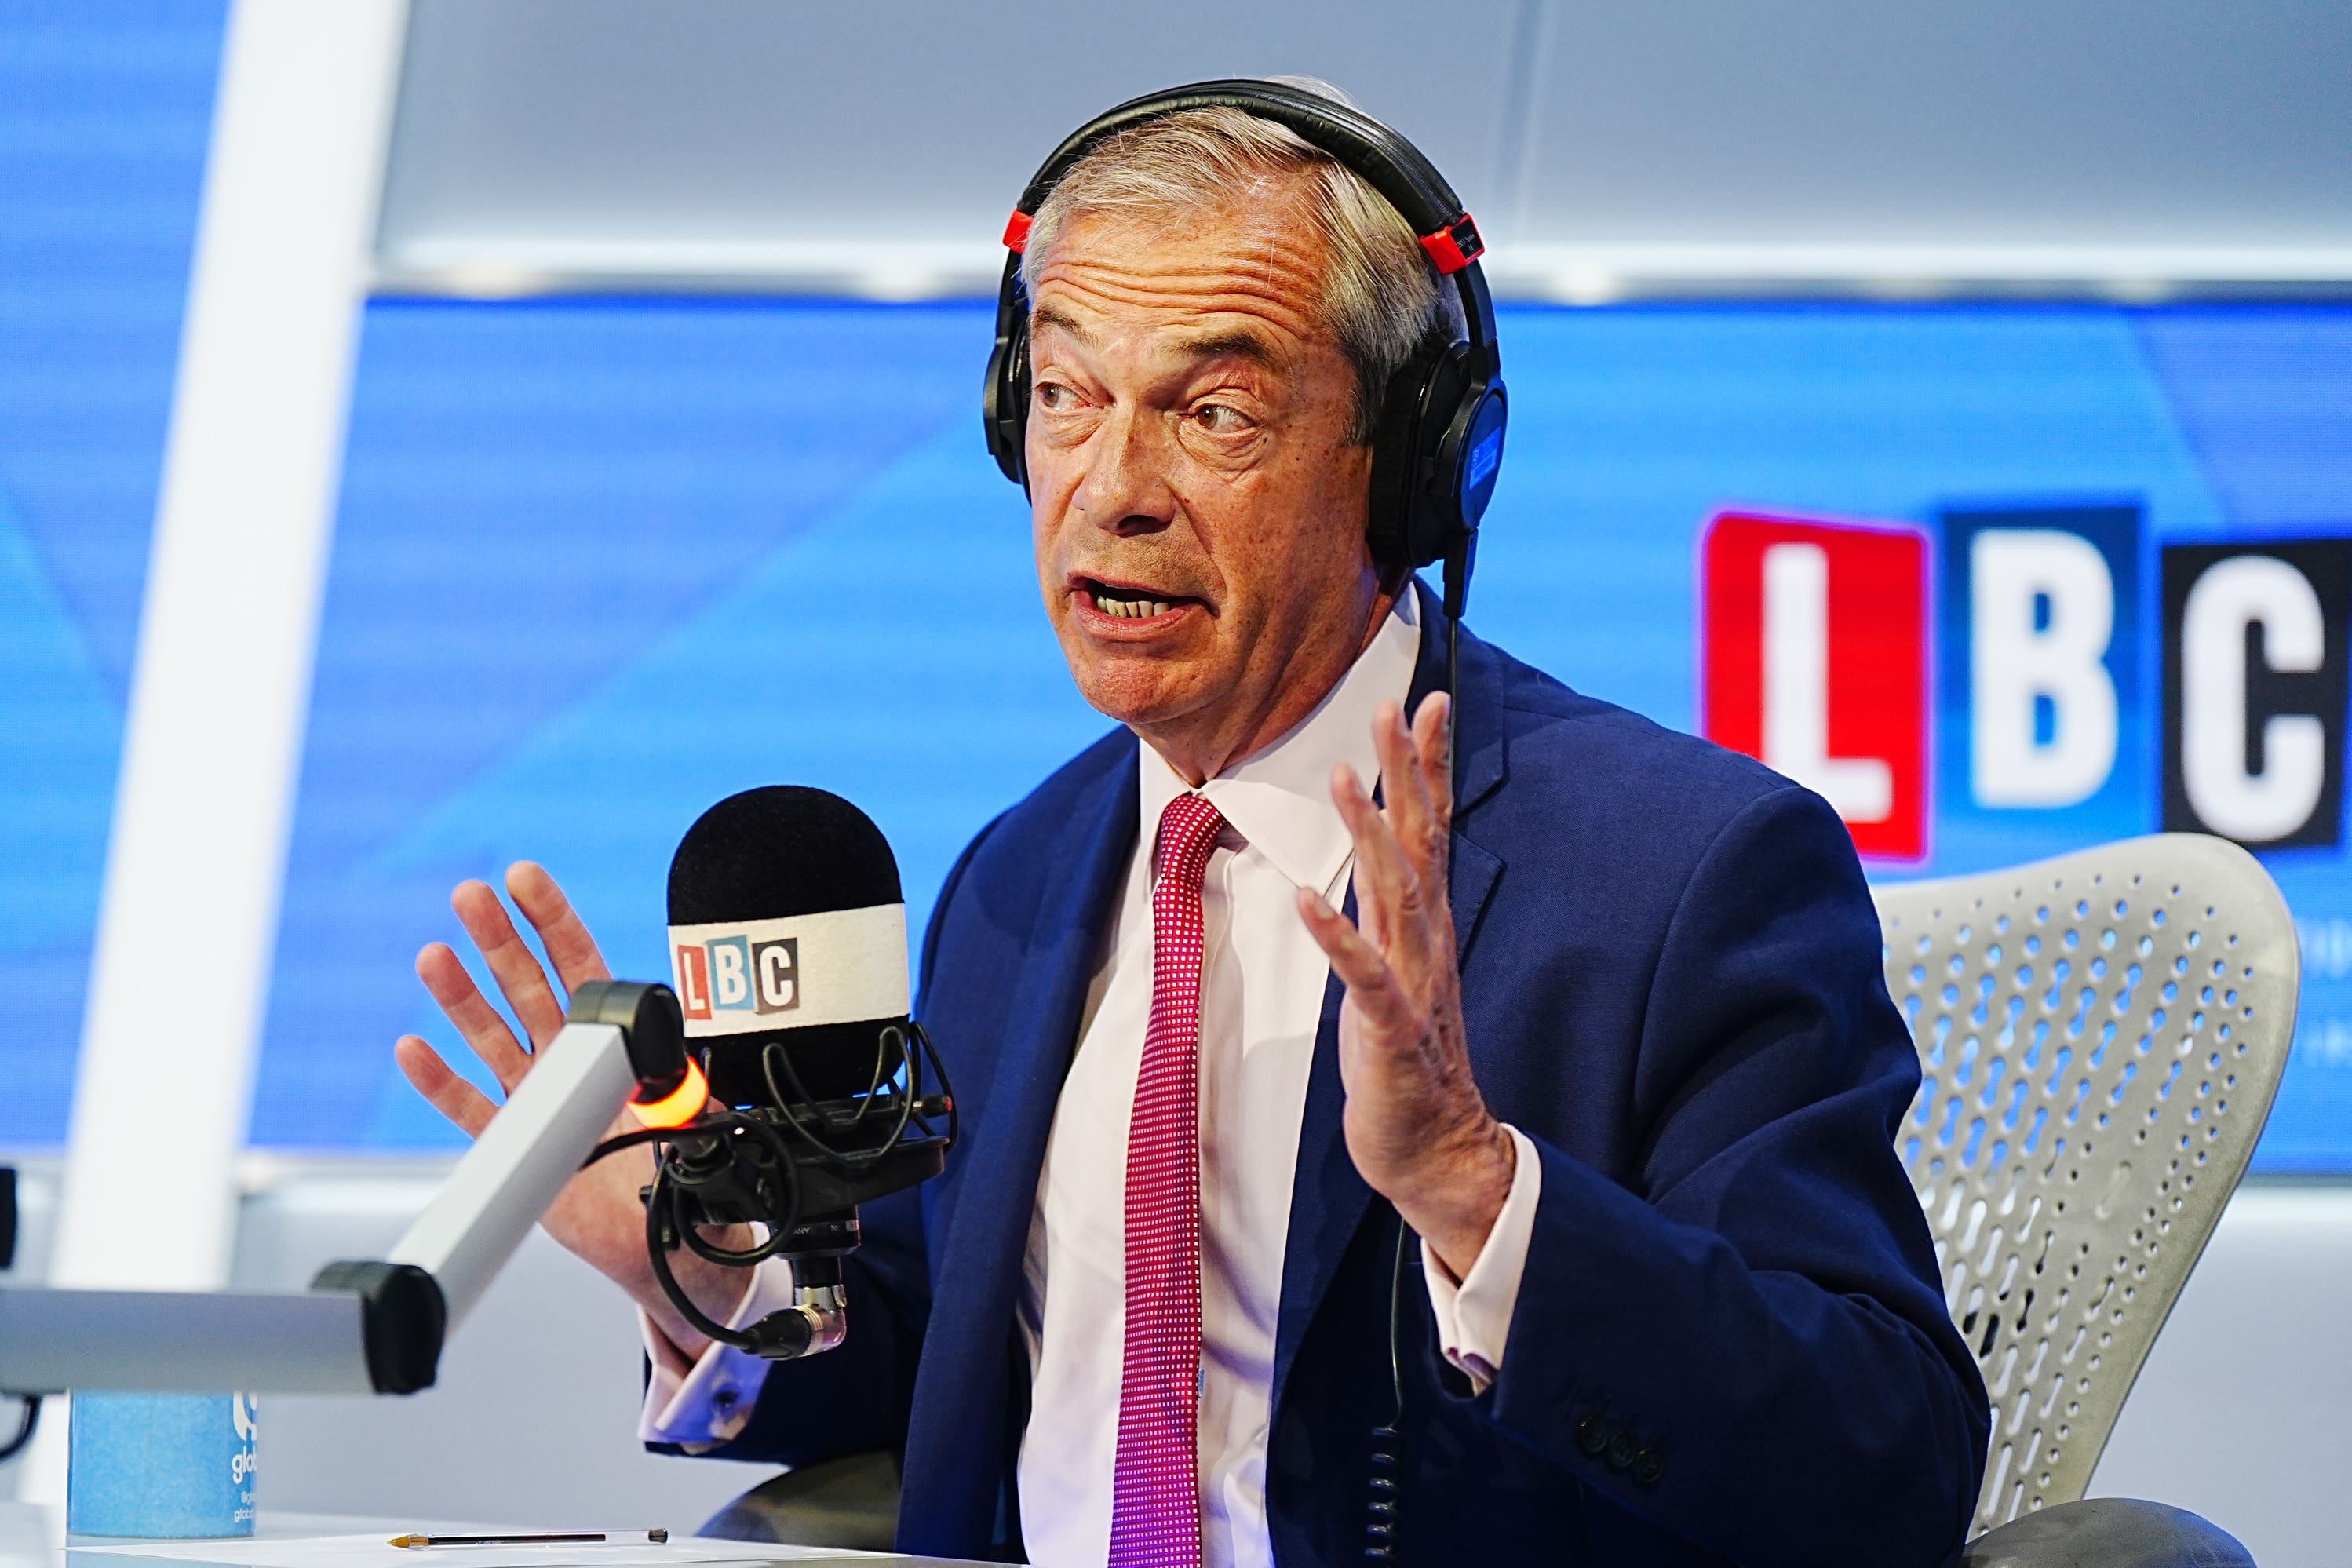 Reform UK leader Nigel Farage has suggested he could lead a national opposition to Labour after the General Election (Aaron Chown/PA)